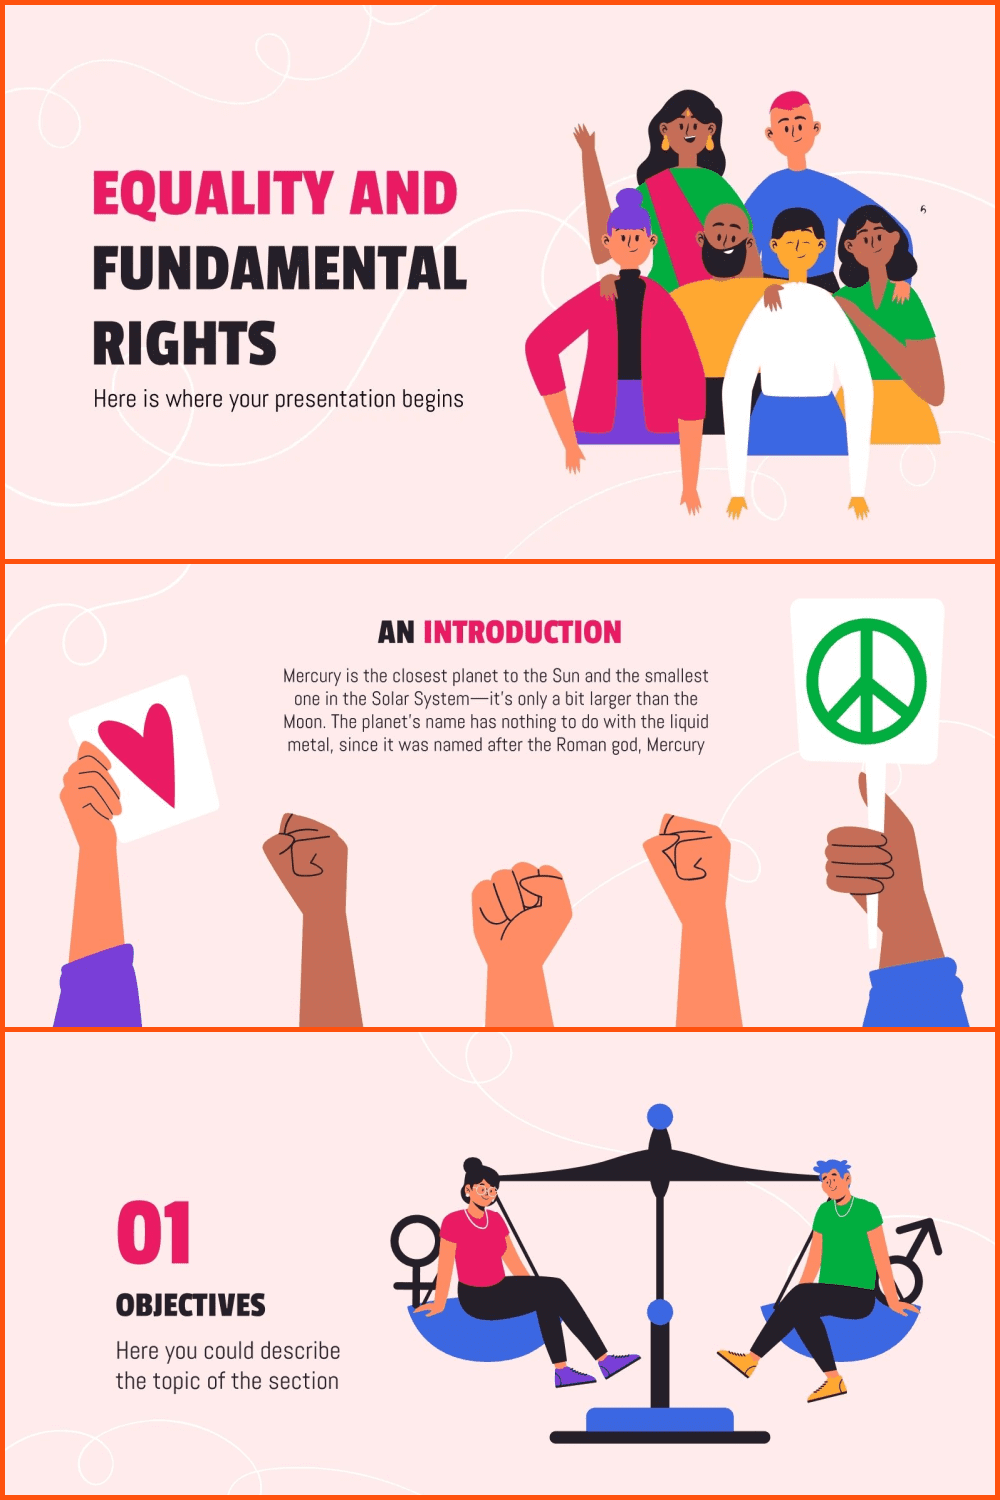 Equality and fundamental rights.